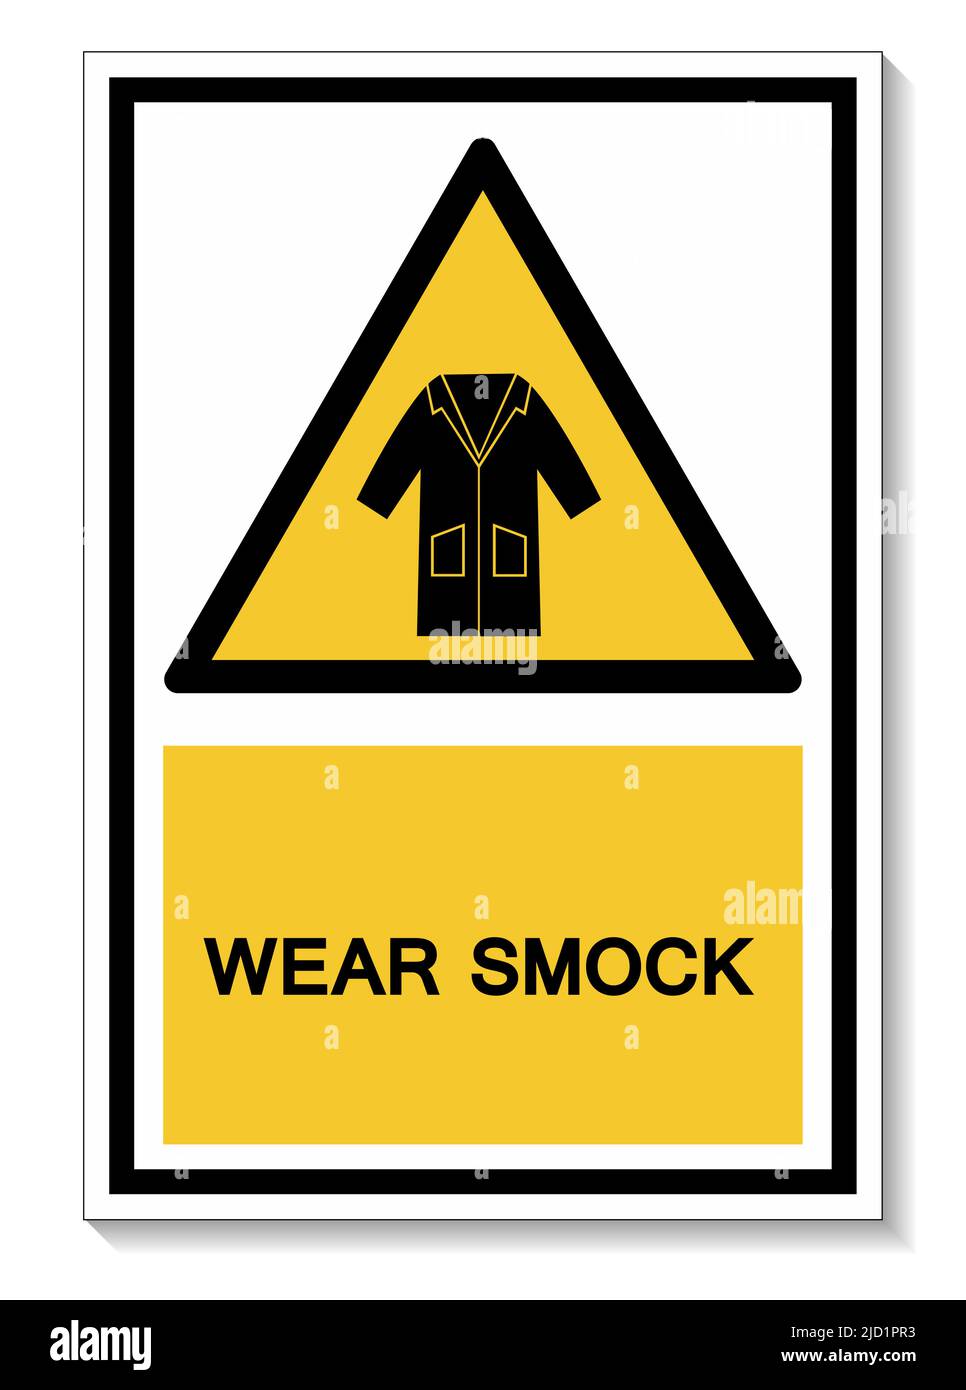 PPE Icon.Wear Smock Symbol Sign Isolate On White Background,Vector Illustration EPS.10 Stock Vector